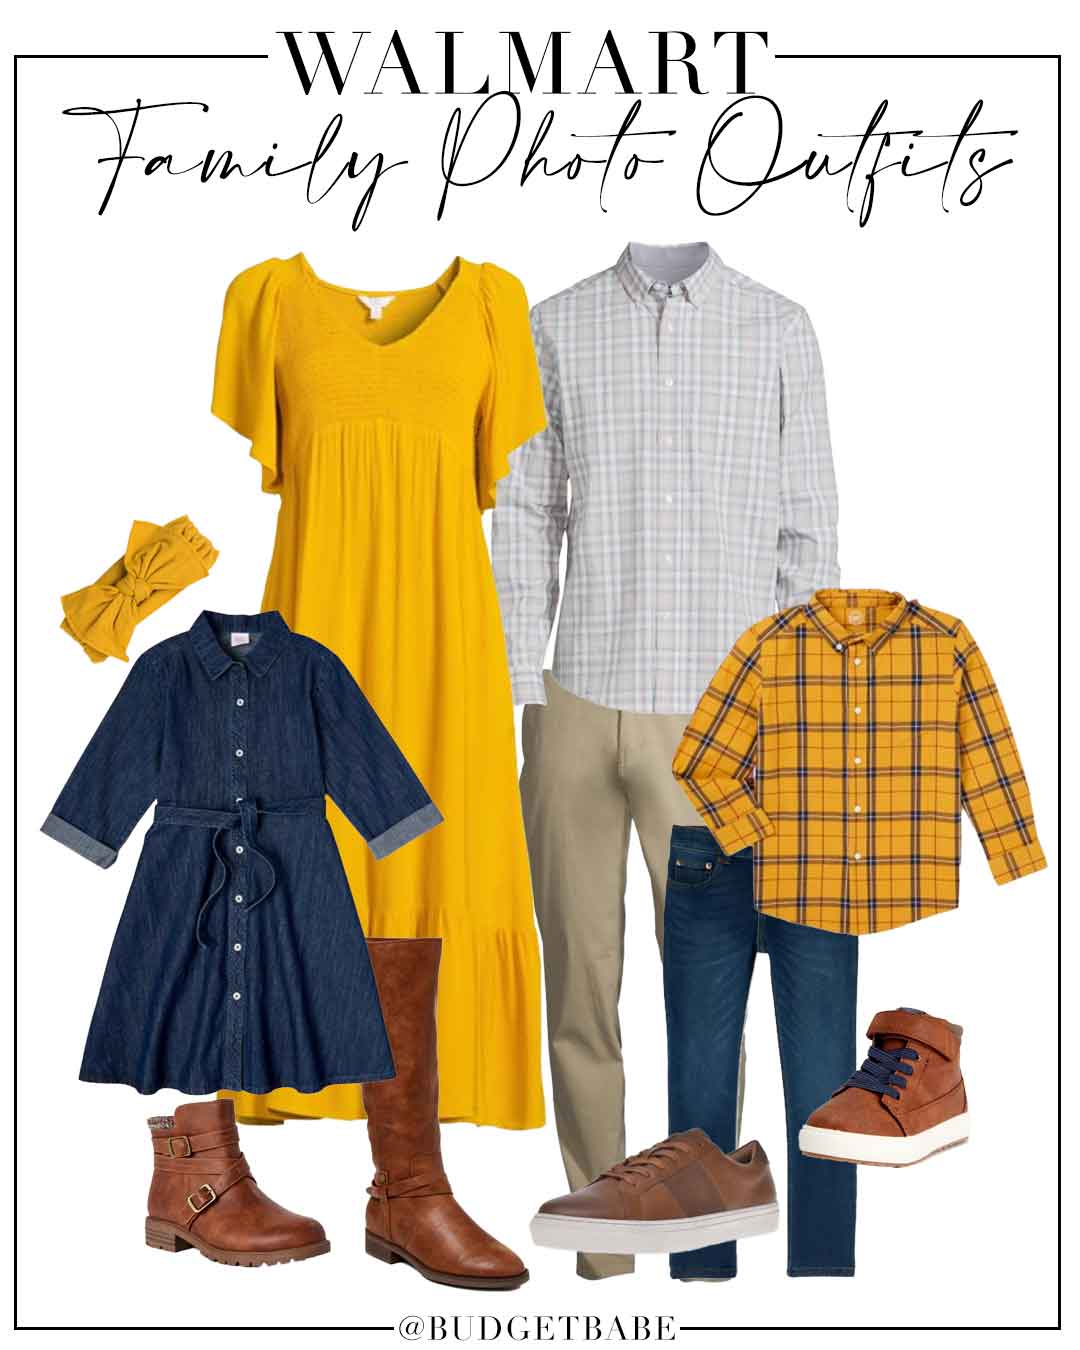 Walmart Family Matching Outfit Ideas and Inspiration for Holiday, Family Photos, Christmas, Matching Pajamas!